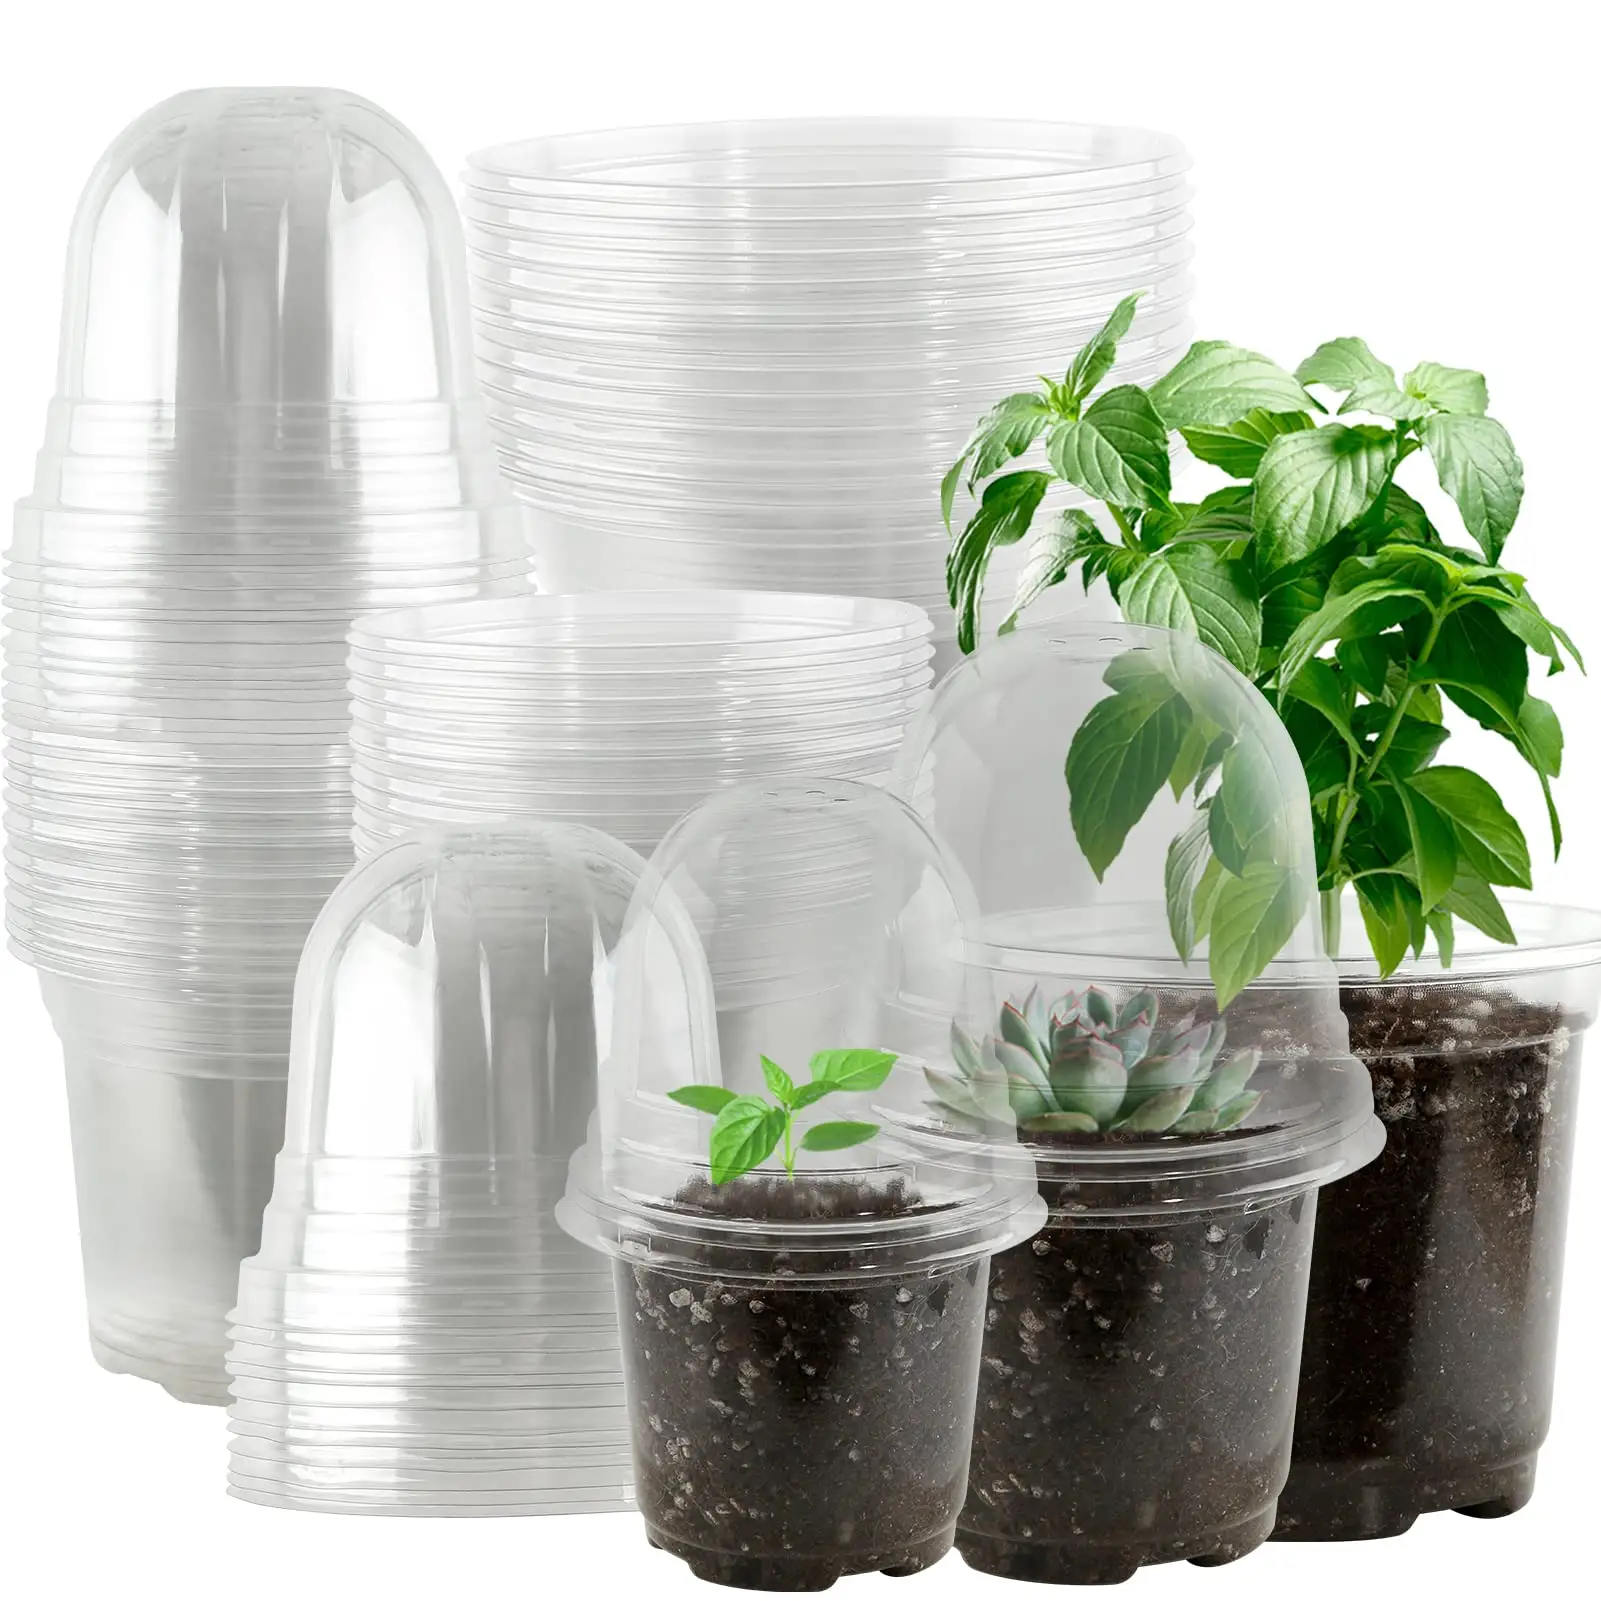 Clear Plant Nursery Pots Variety Pack Seedling Pot with Dome Seed Starter Flower Planter Gardening Container with Drainage Hole